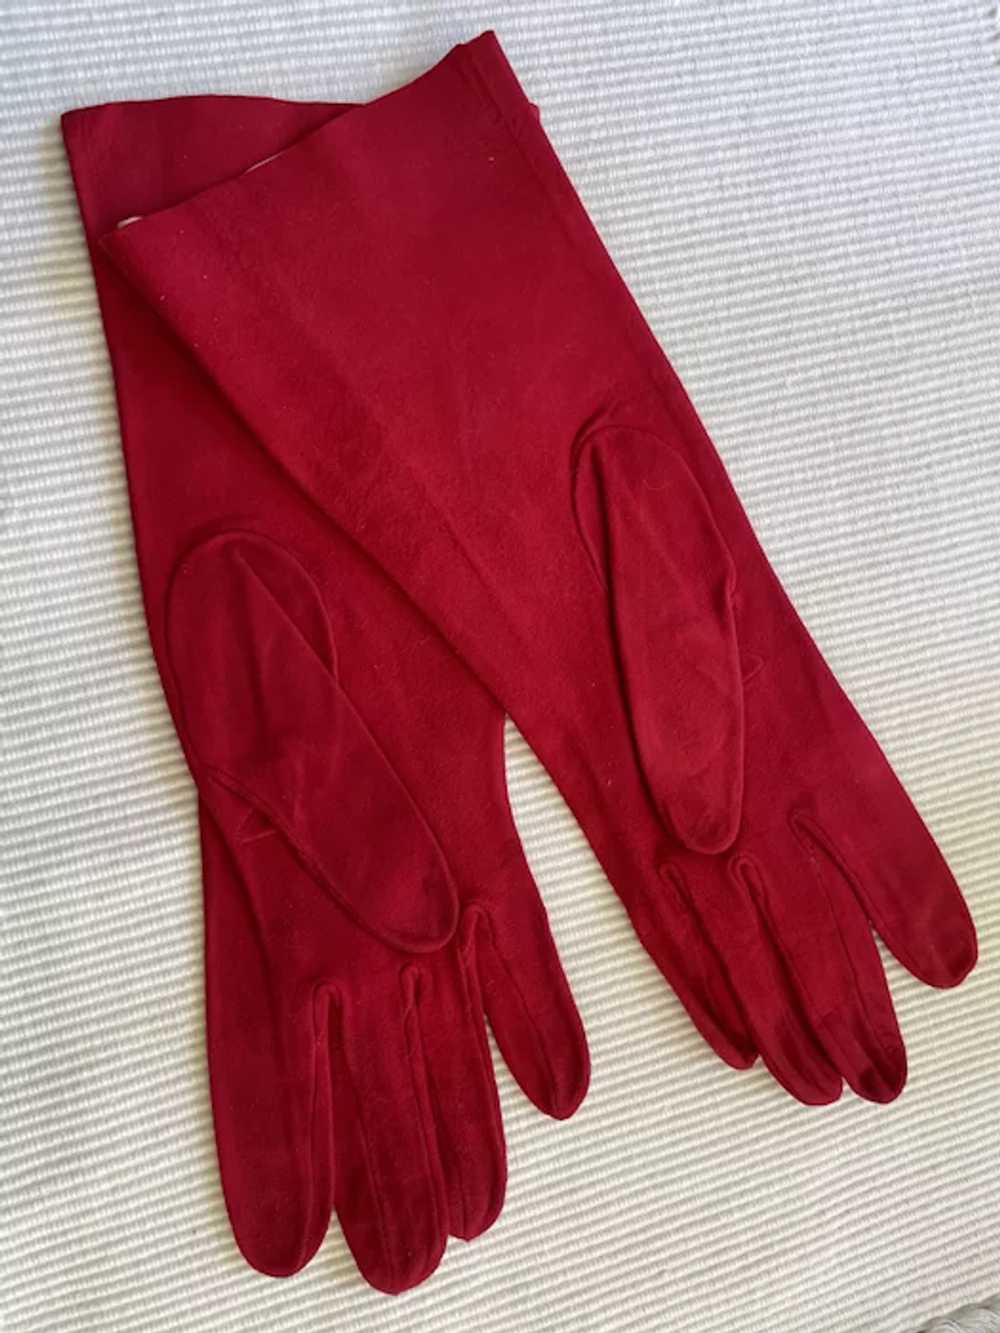 Cherry Red French Suede Gloves - image 2